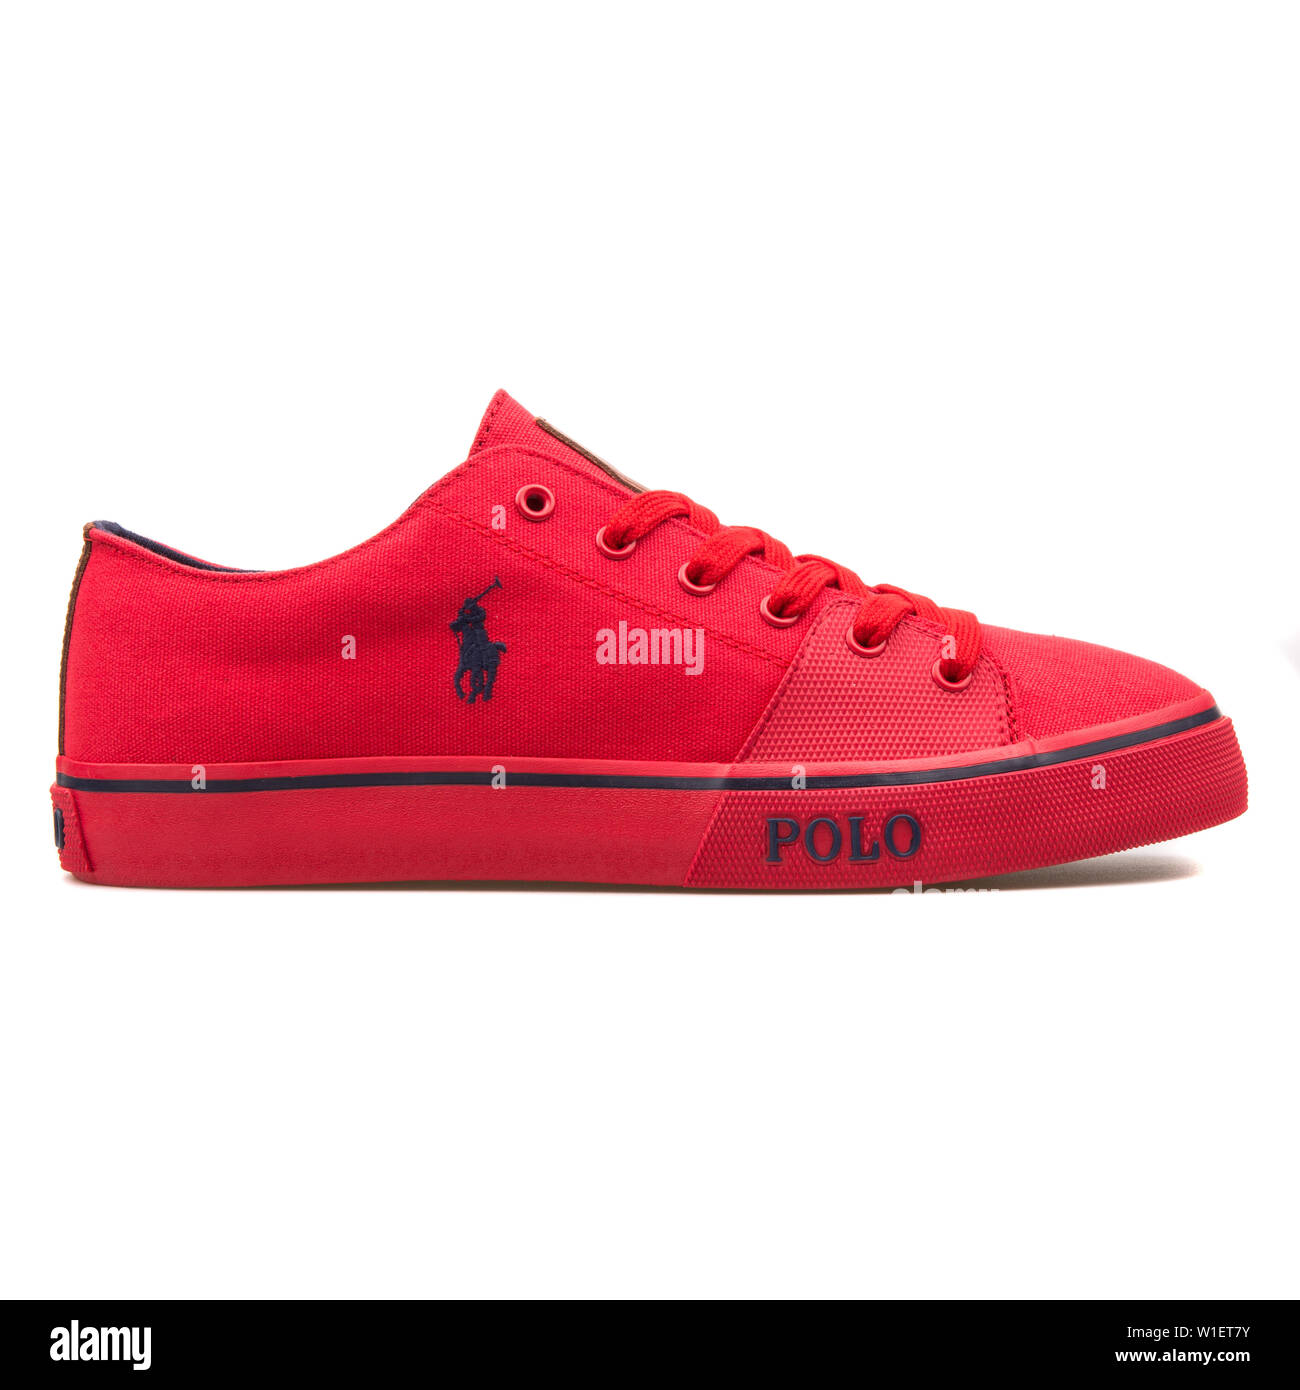 VIENNA, AUSTRIA - AUGUST 10, 2017: Polo Ralph Lauren Cantor Low red sneaker  on white background Stock Photo - Alamy